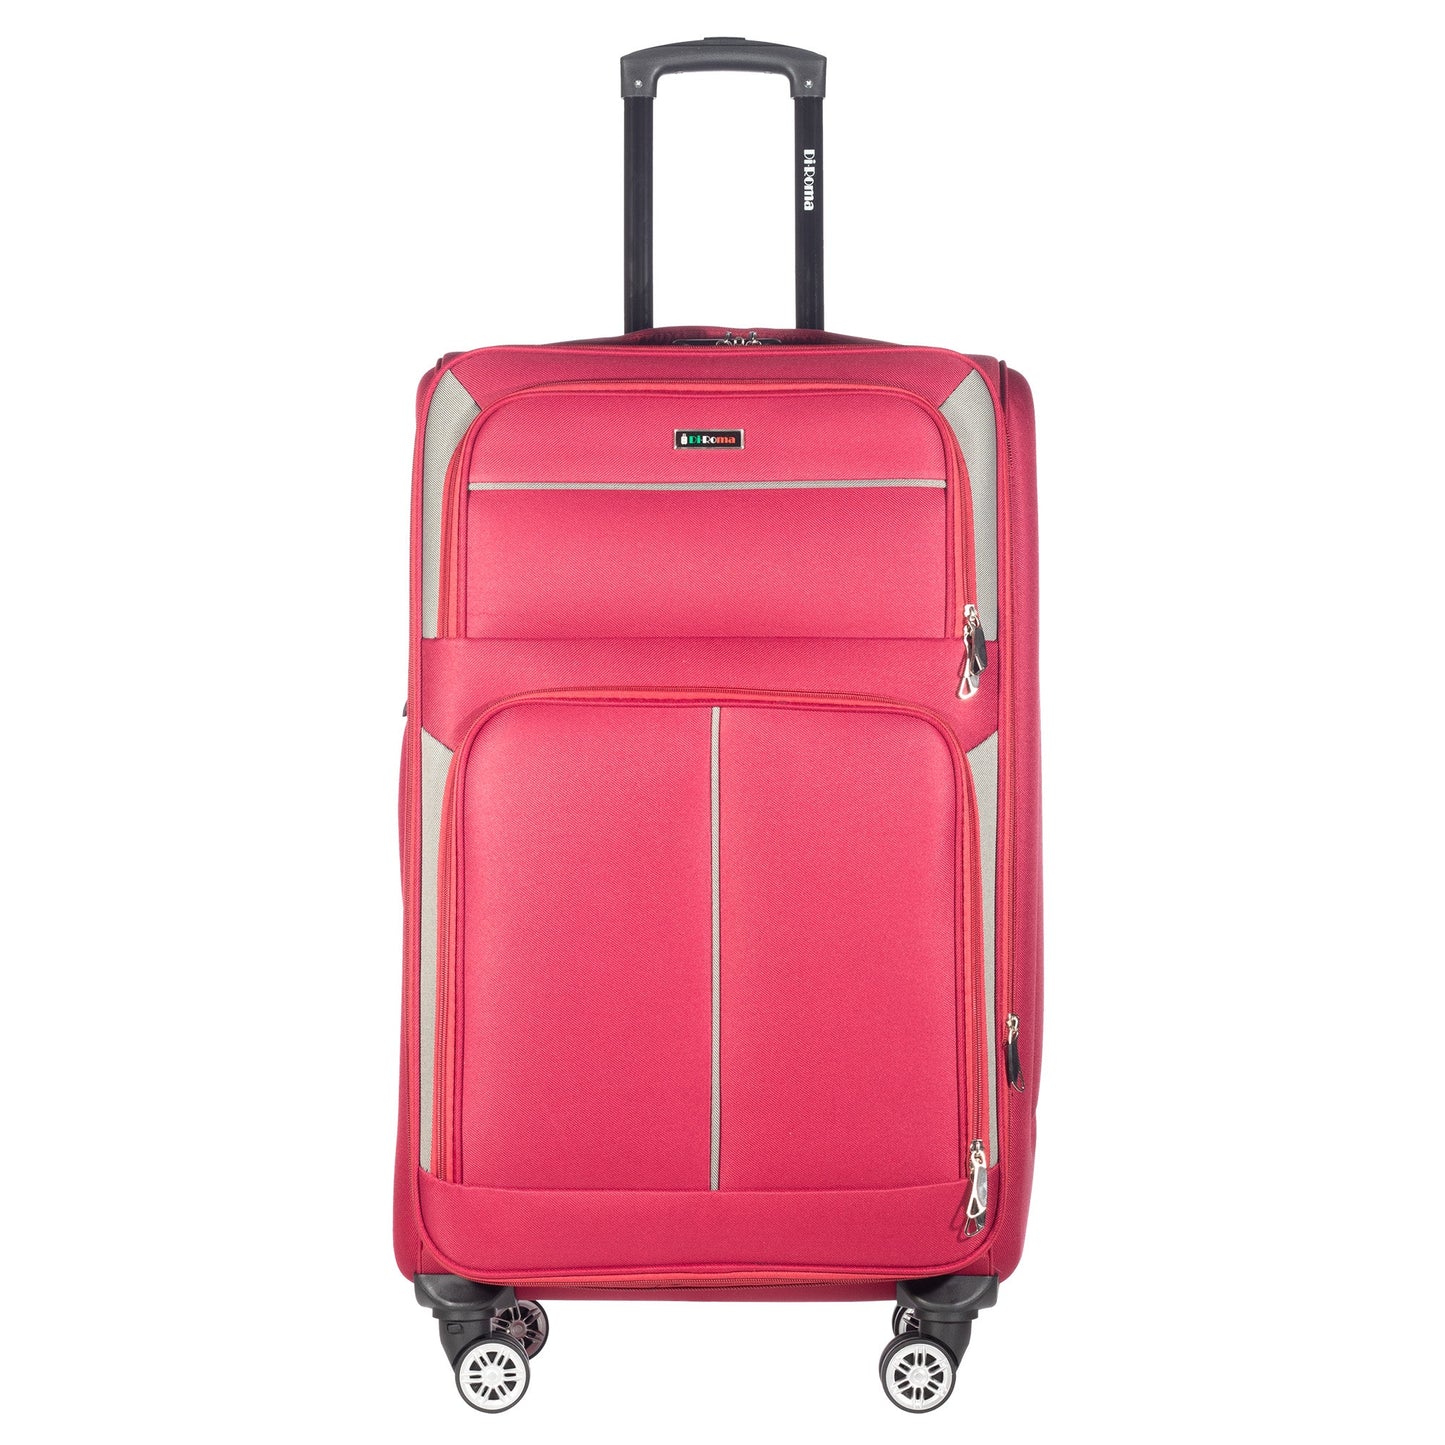 Star collection red luggage (20/26/28/30") Suitcase